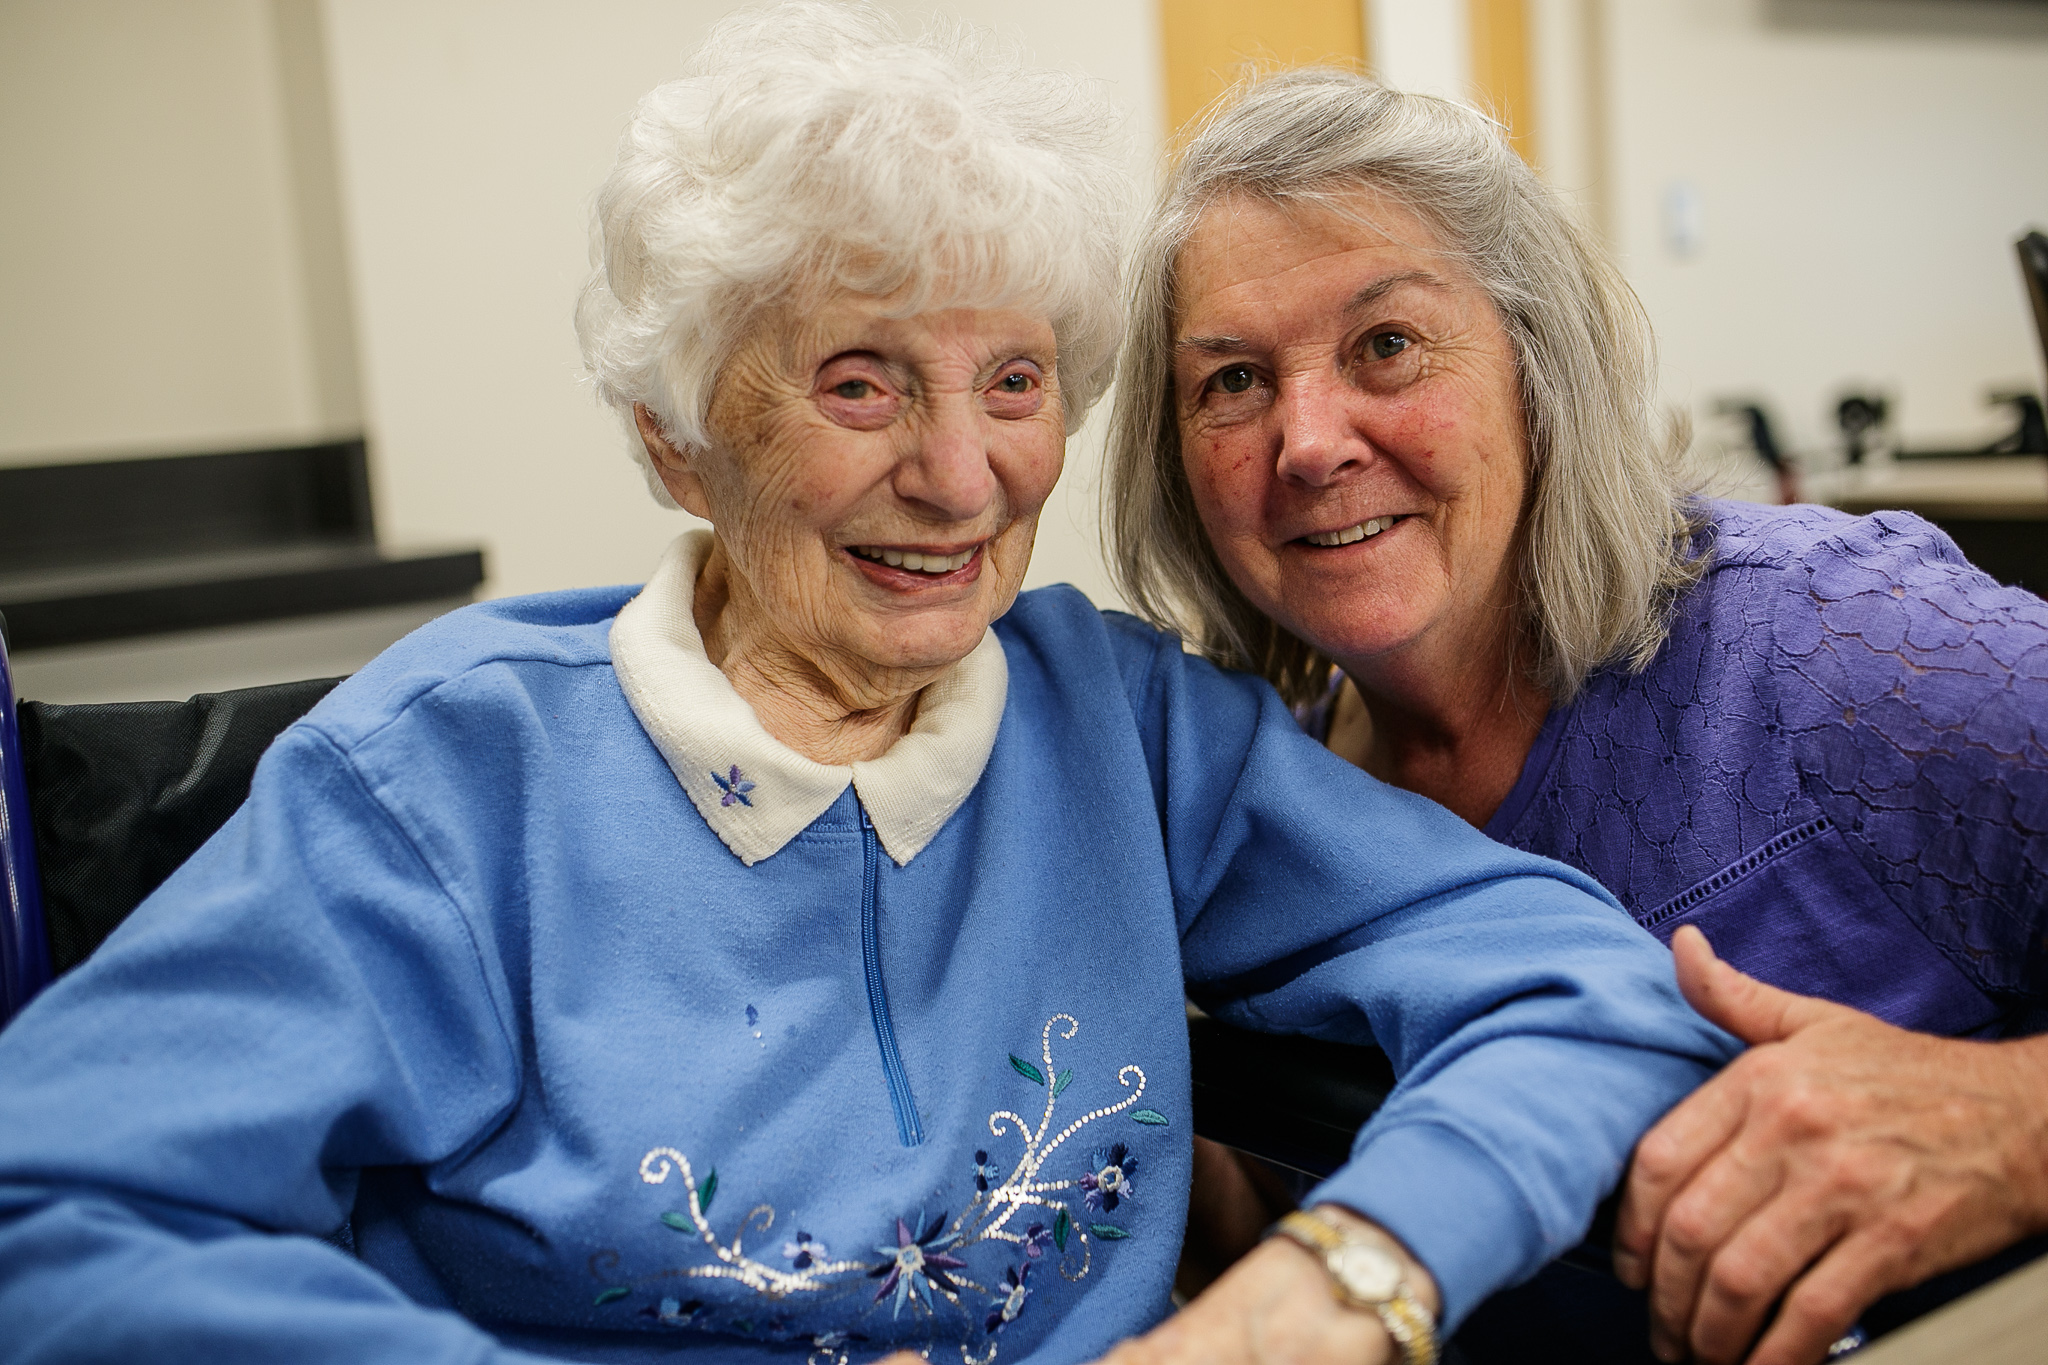 Pictured left to right: Mary Evatt Gainor and her niece Ginny Evatt Knag pose for a portrait during the Perry Center Centennial Event in Grand Blanc on Saturday, May 14, 2022. (Jenifer Veloso | MLive.com)